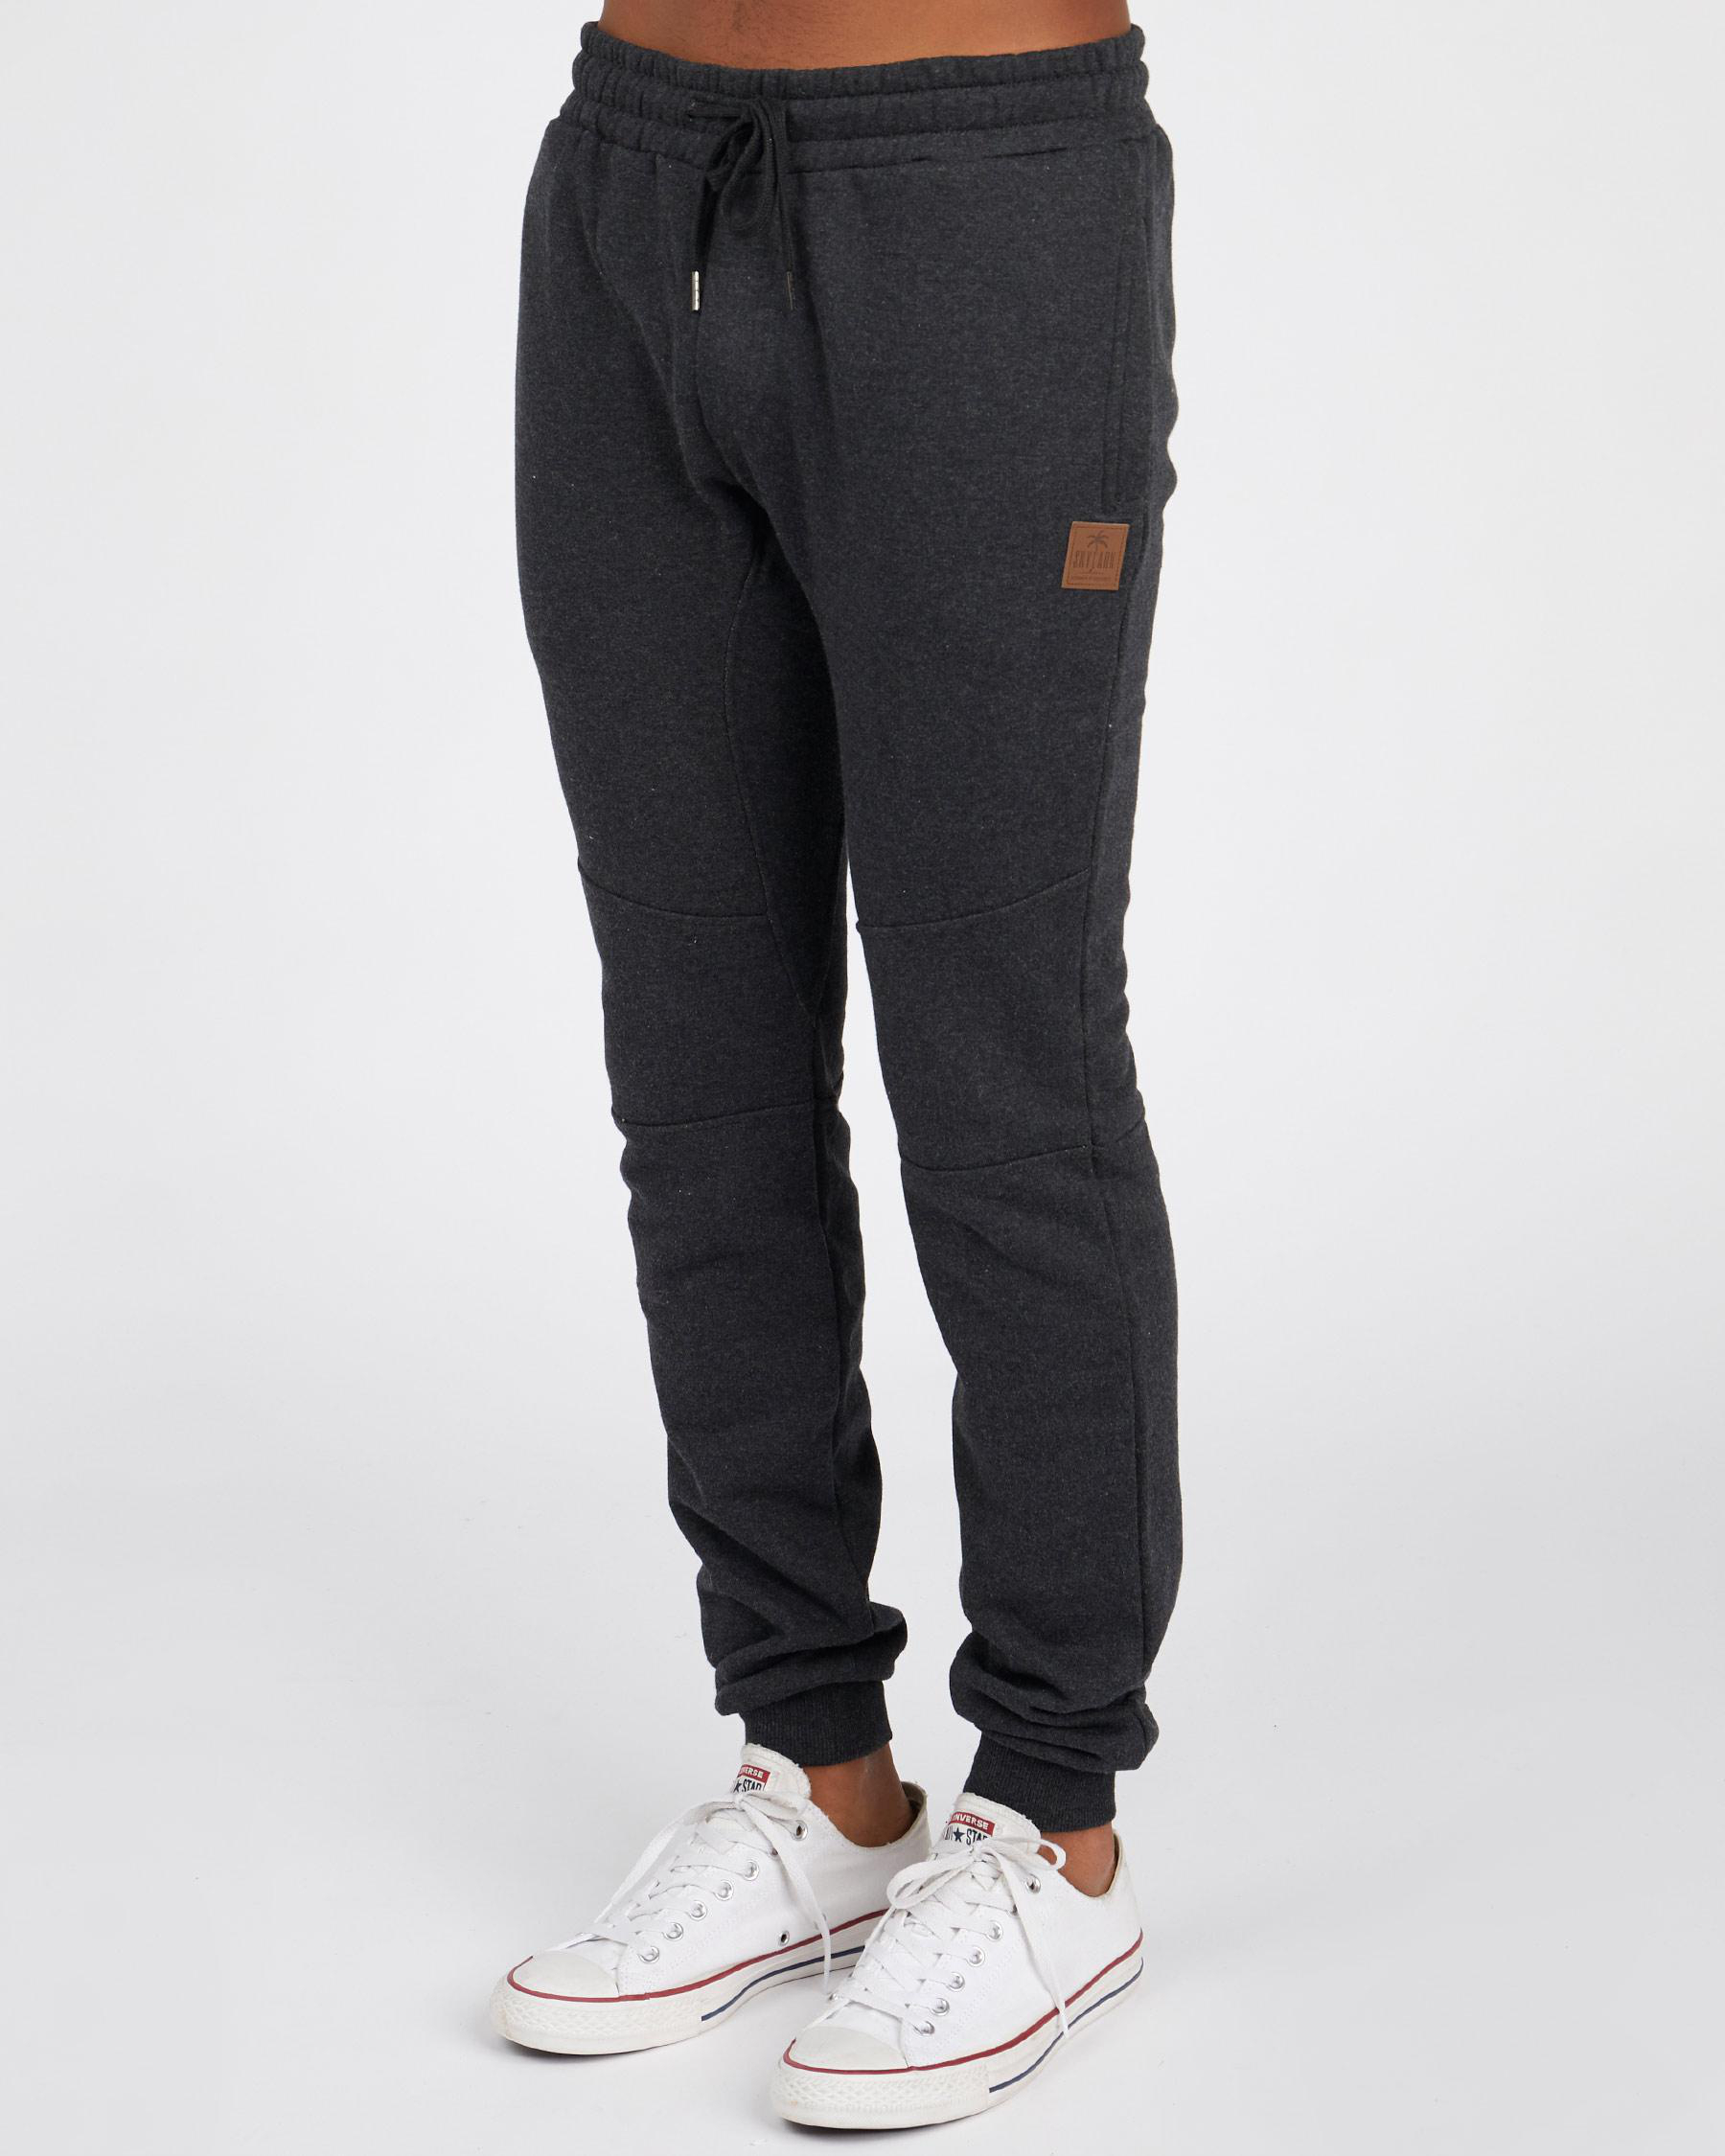 Skylark Perform Track Pants In Char Marle - Fast Shipping & Easy ...